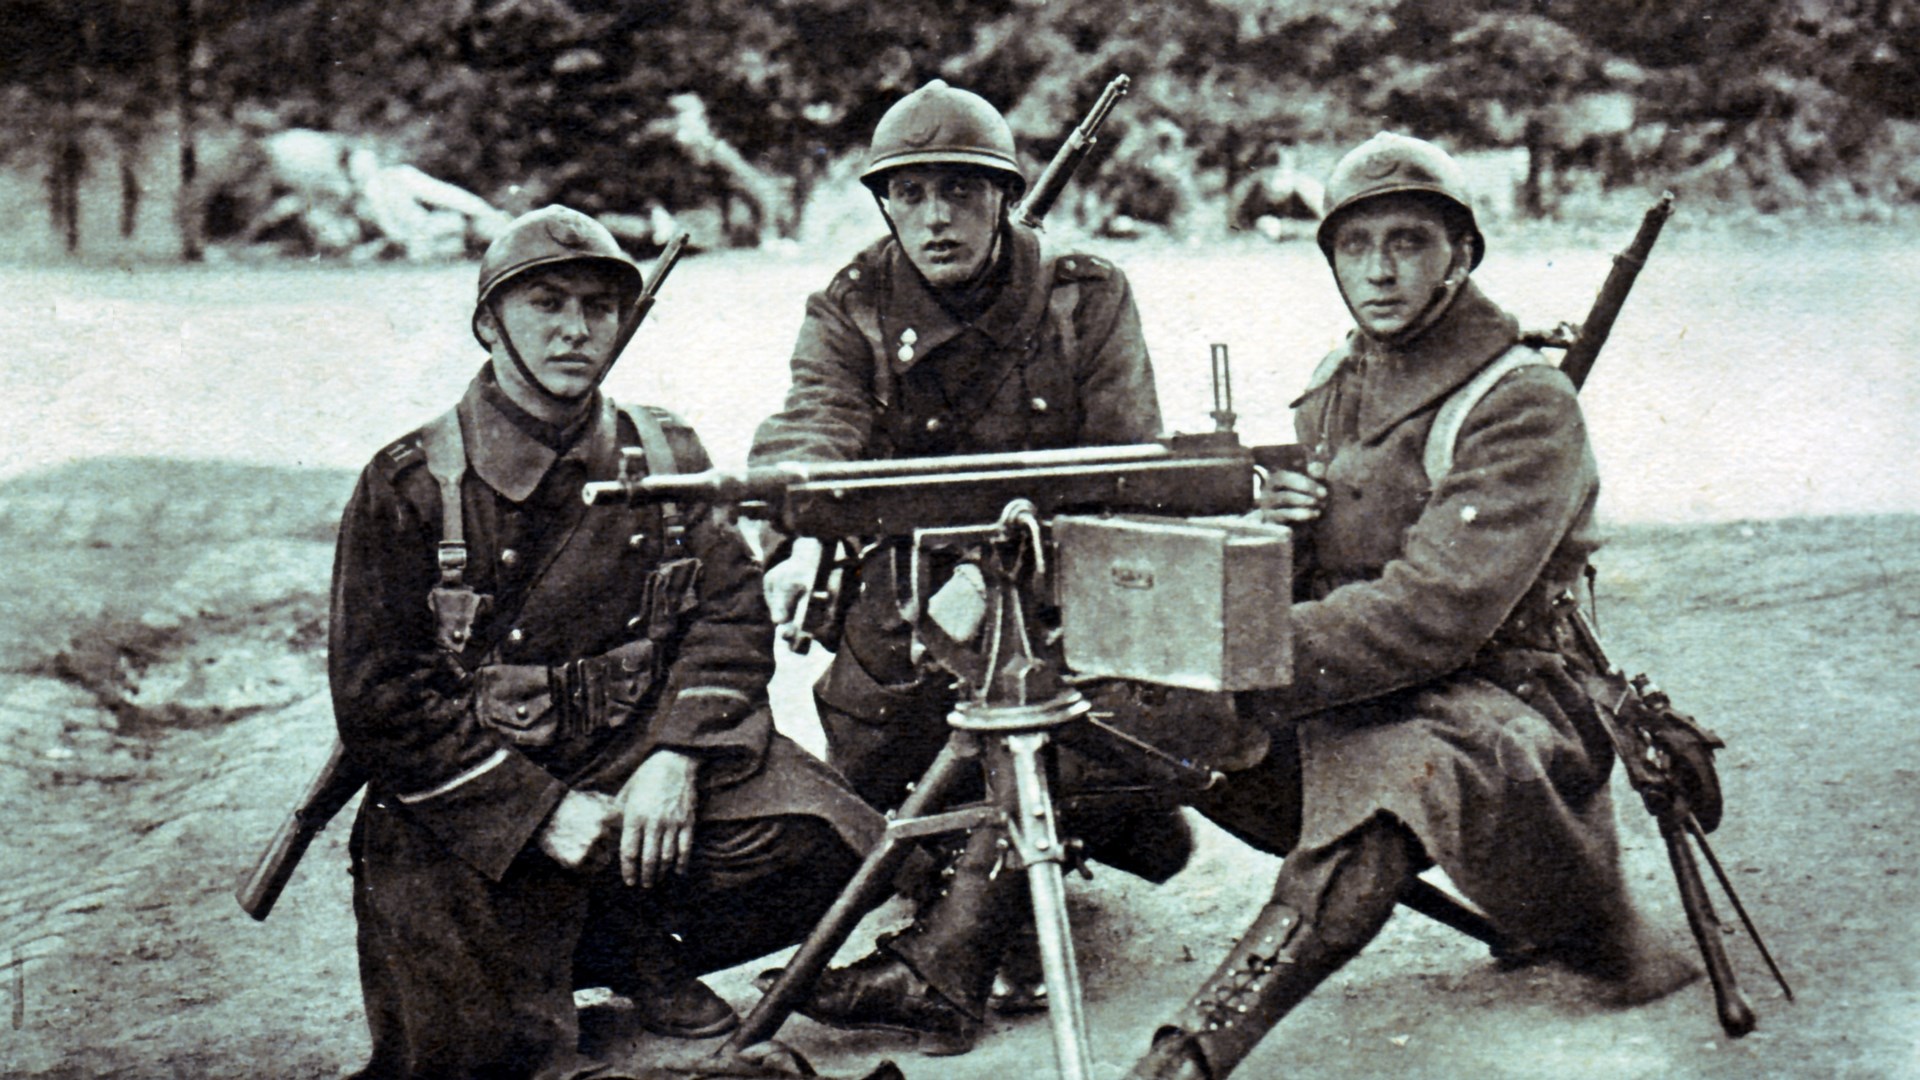 M1895 in Belgian service during World War I. Photograph from author’s collection.